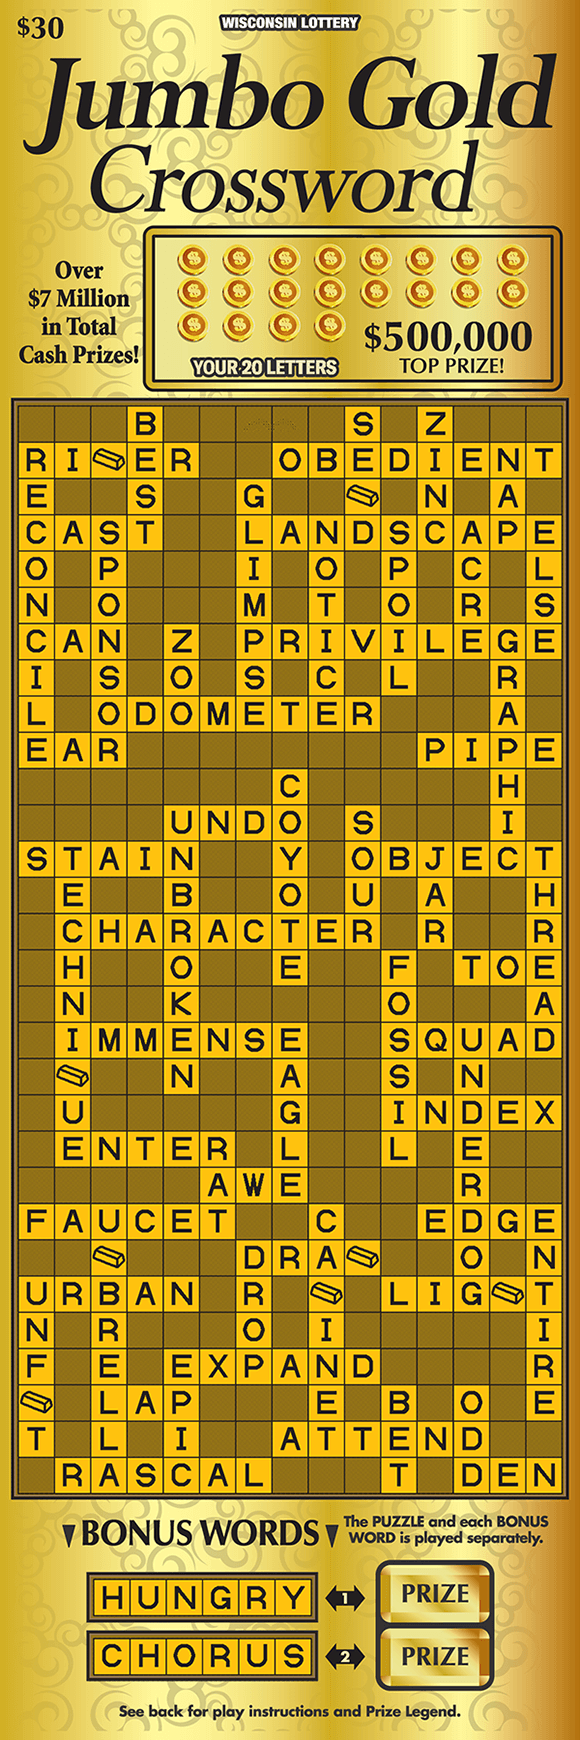 image of oversized crossword ticket with a solid gold background with a lighter gold crossword play area on scratch ticket from wisconsin lottery 